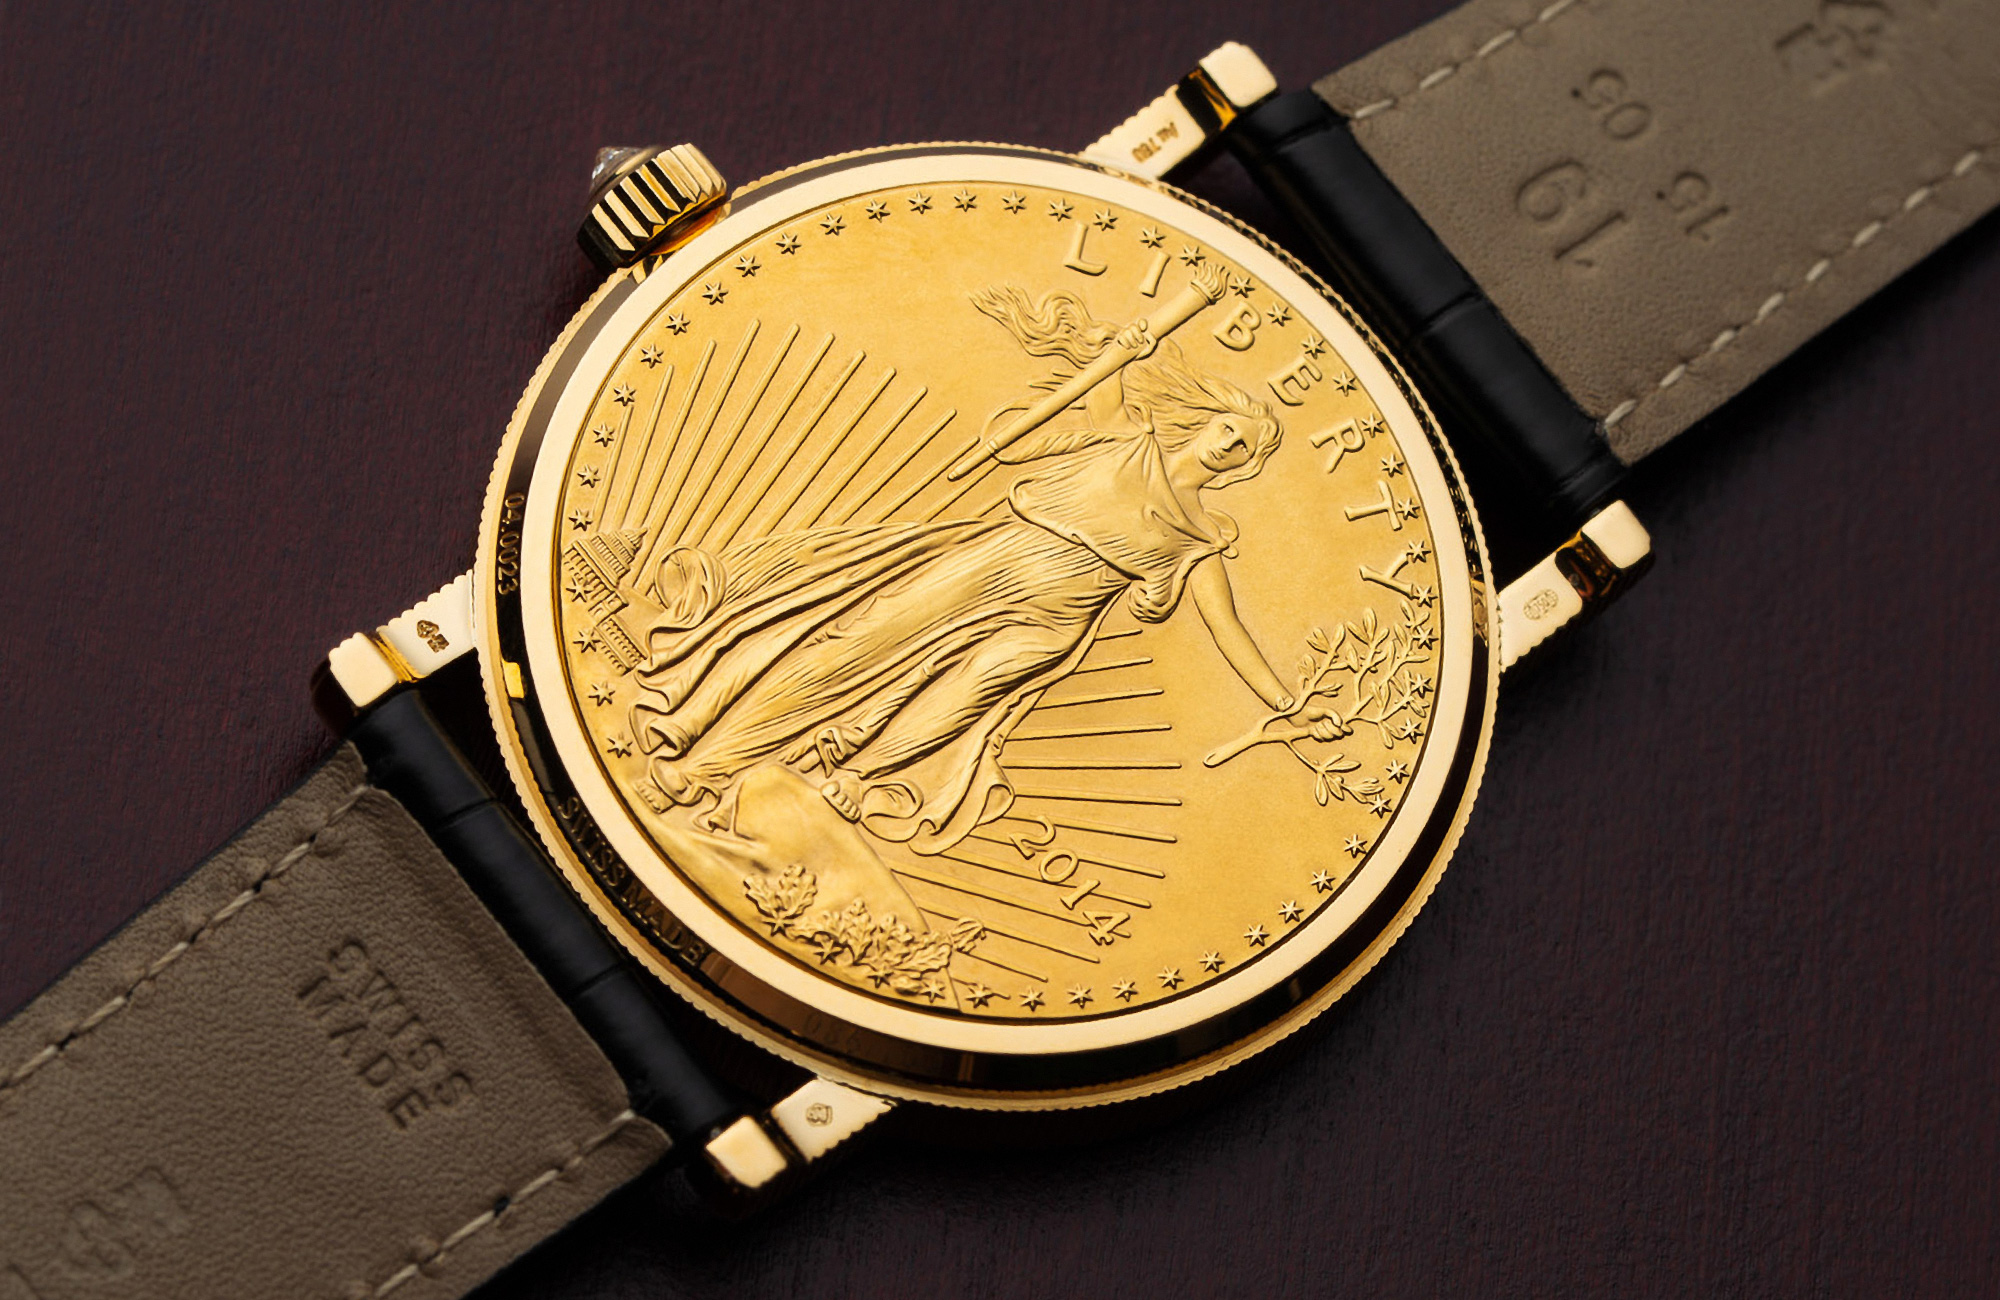 Heritage Coin Watch (C082/03599) by 